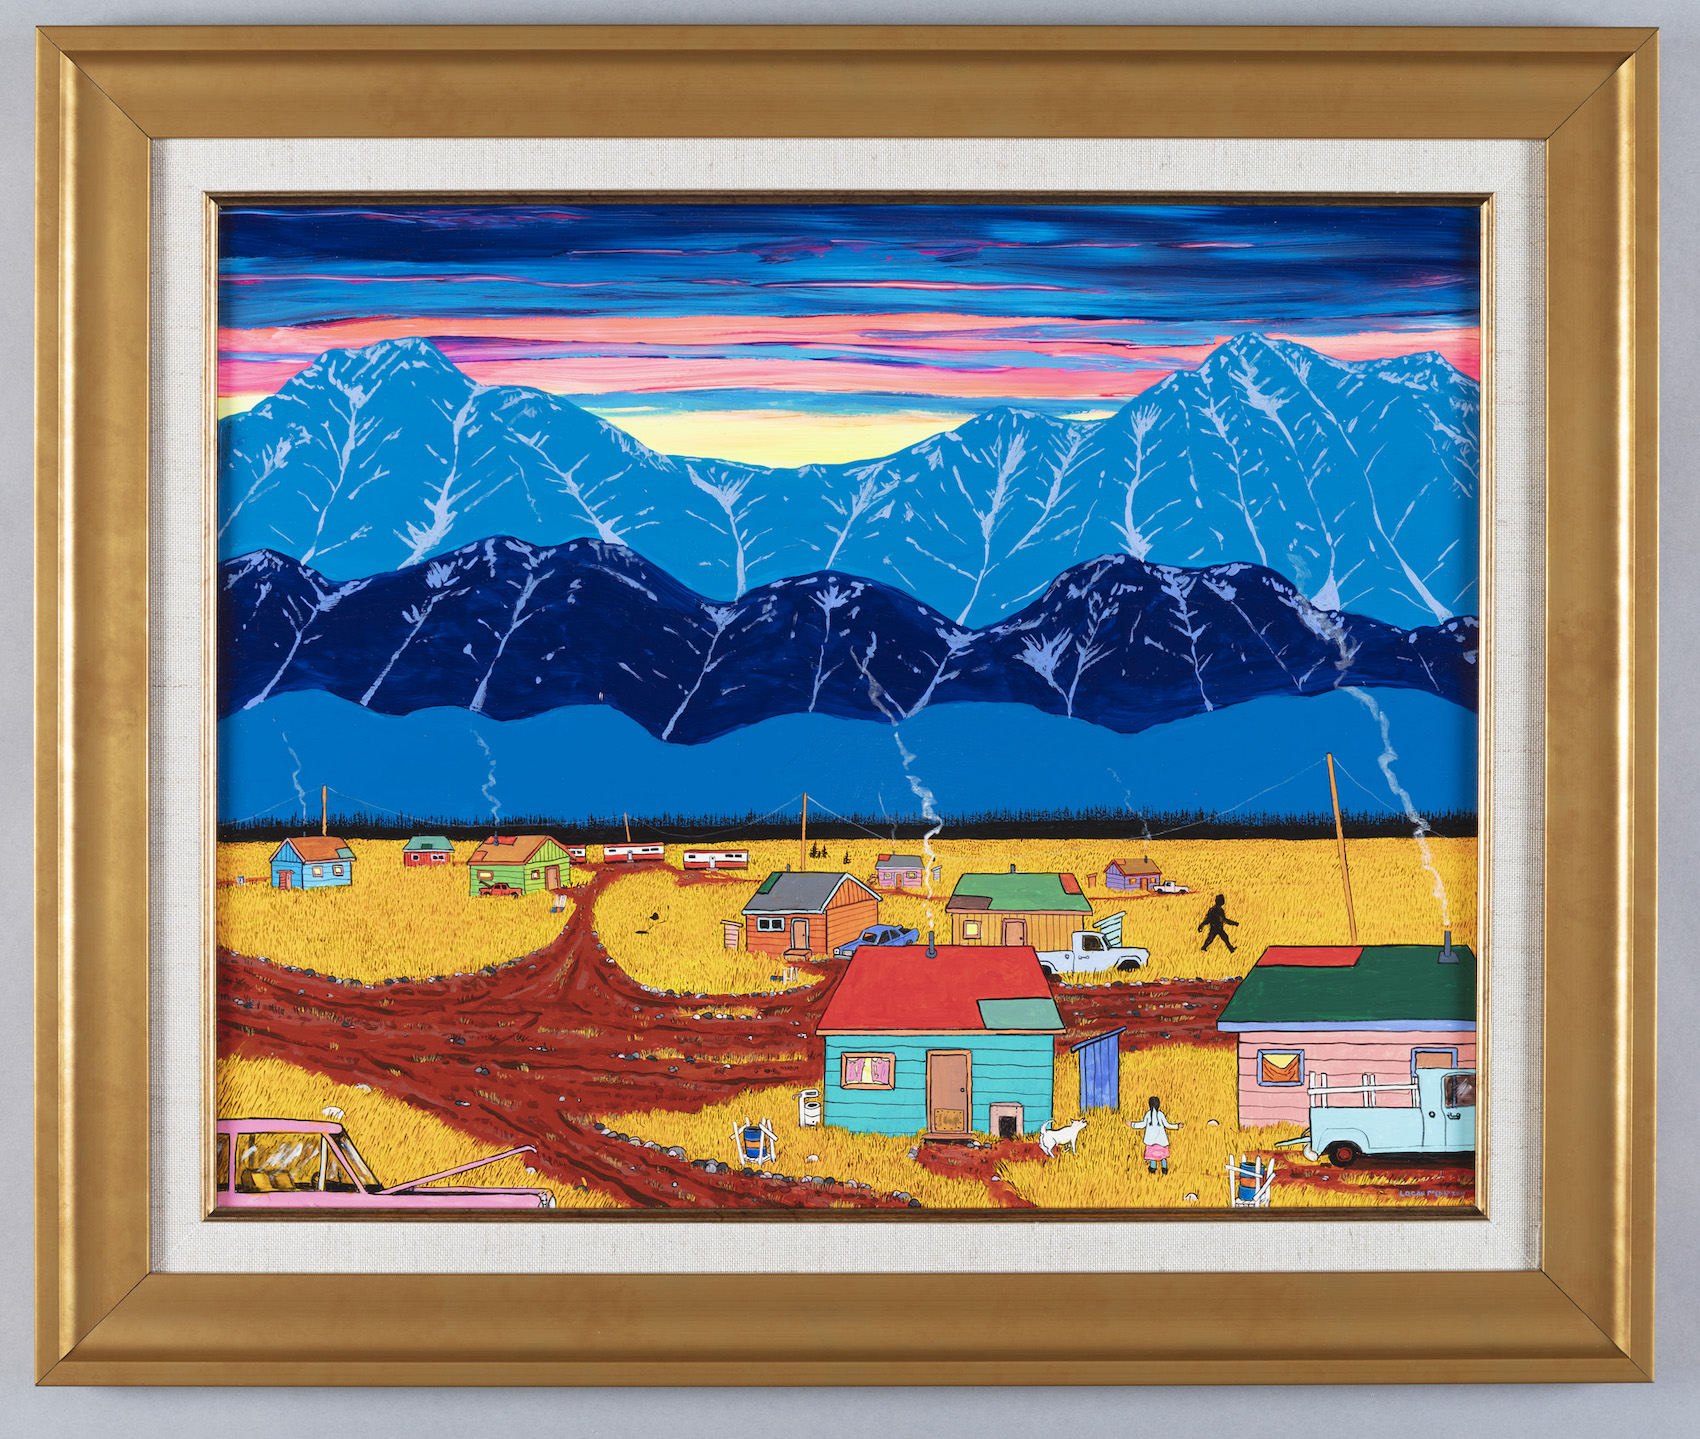 a mountainous village scene where a young girl looks towards a large silhouetted figure walking amongst the houses. Abby and the Sasquatch are the only figures in this brightly painted landscape that is otherwise filled with kit houses and abandoned cars.